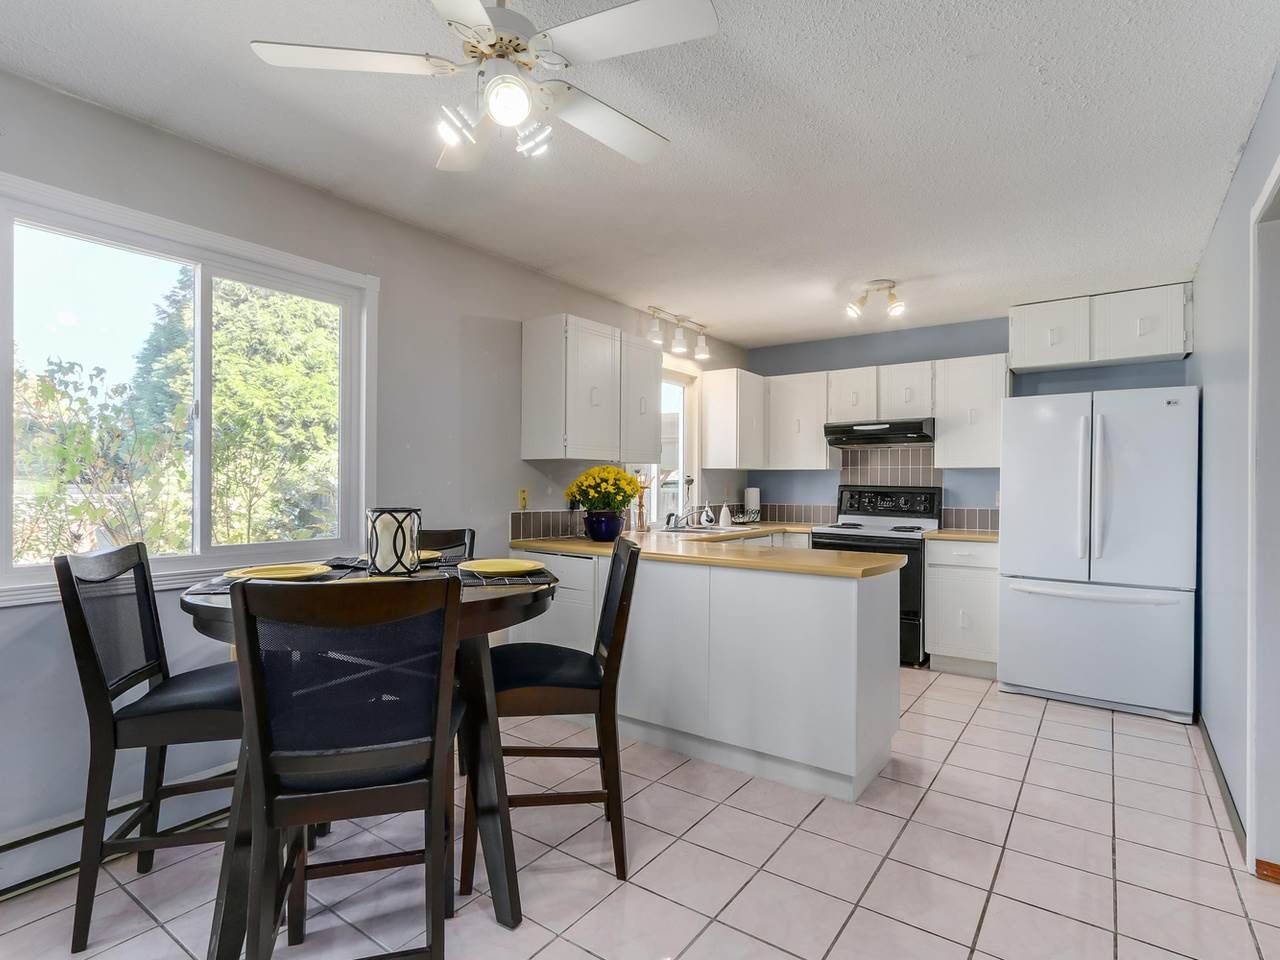 Great working kitchen with lots of counter space. Lots of space for eating area with big picture window looks out to fenced back yard.